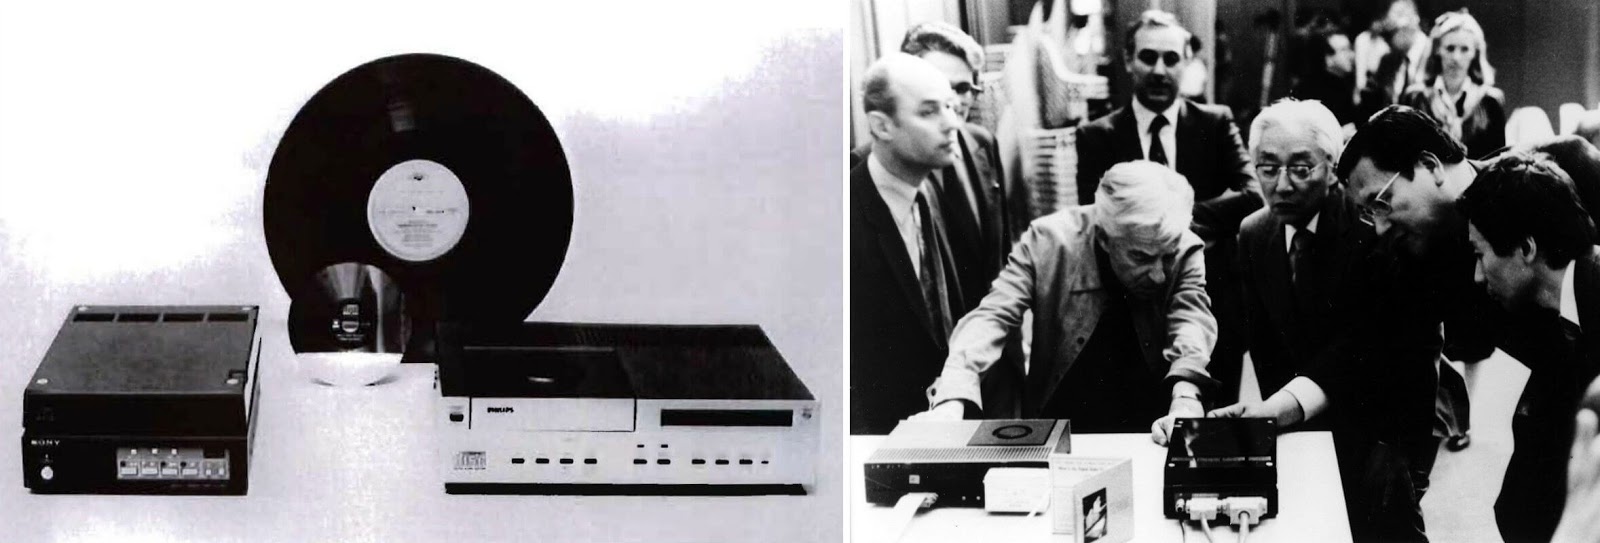 1979: Philips demonstrates digital compact disc, The Storage Engine